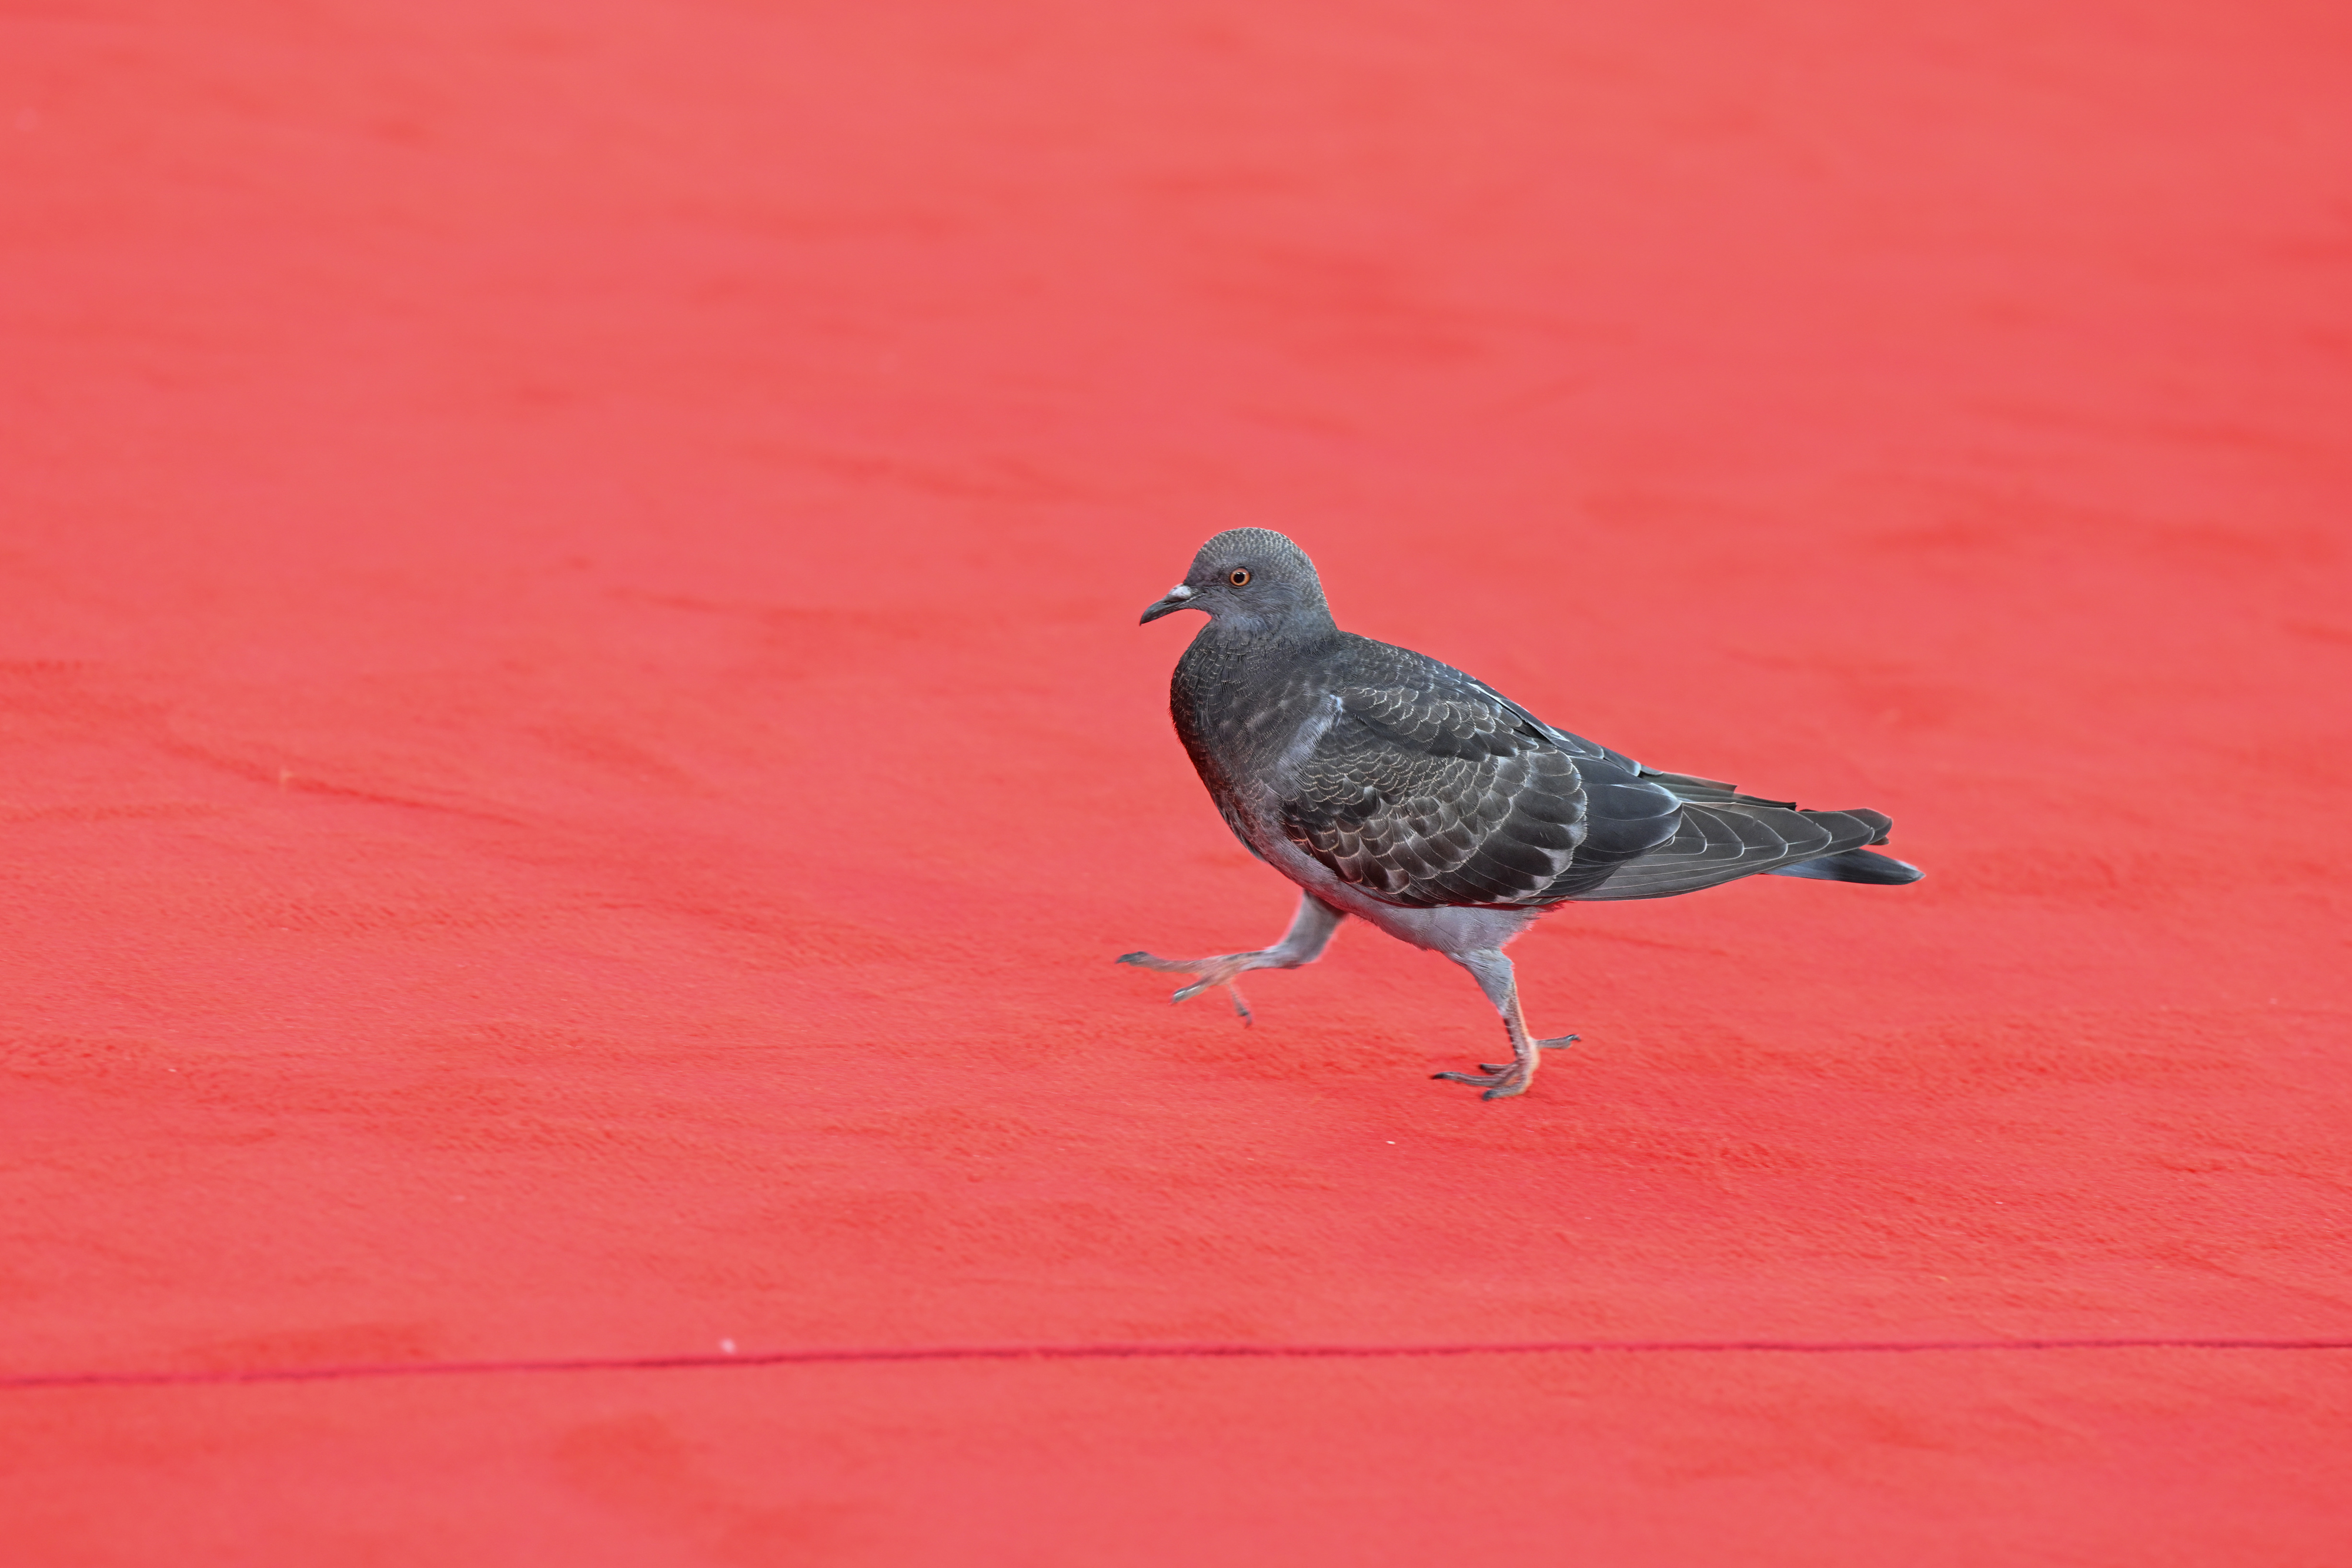 A pigeon on the red carpet